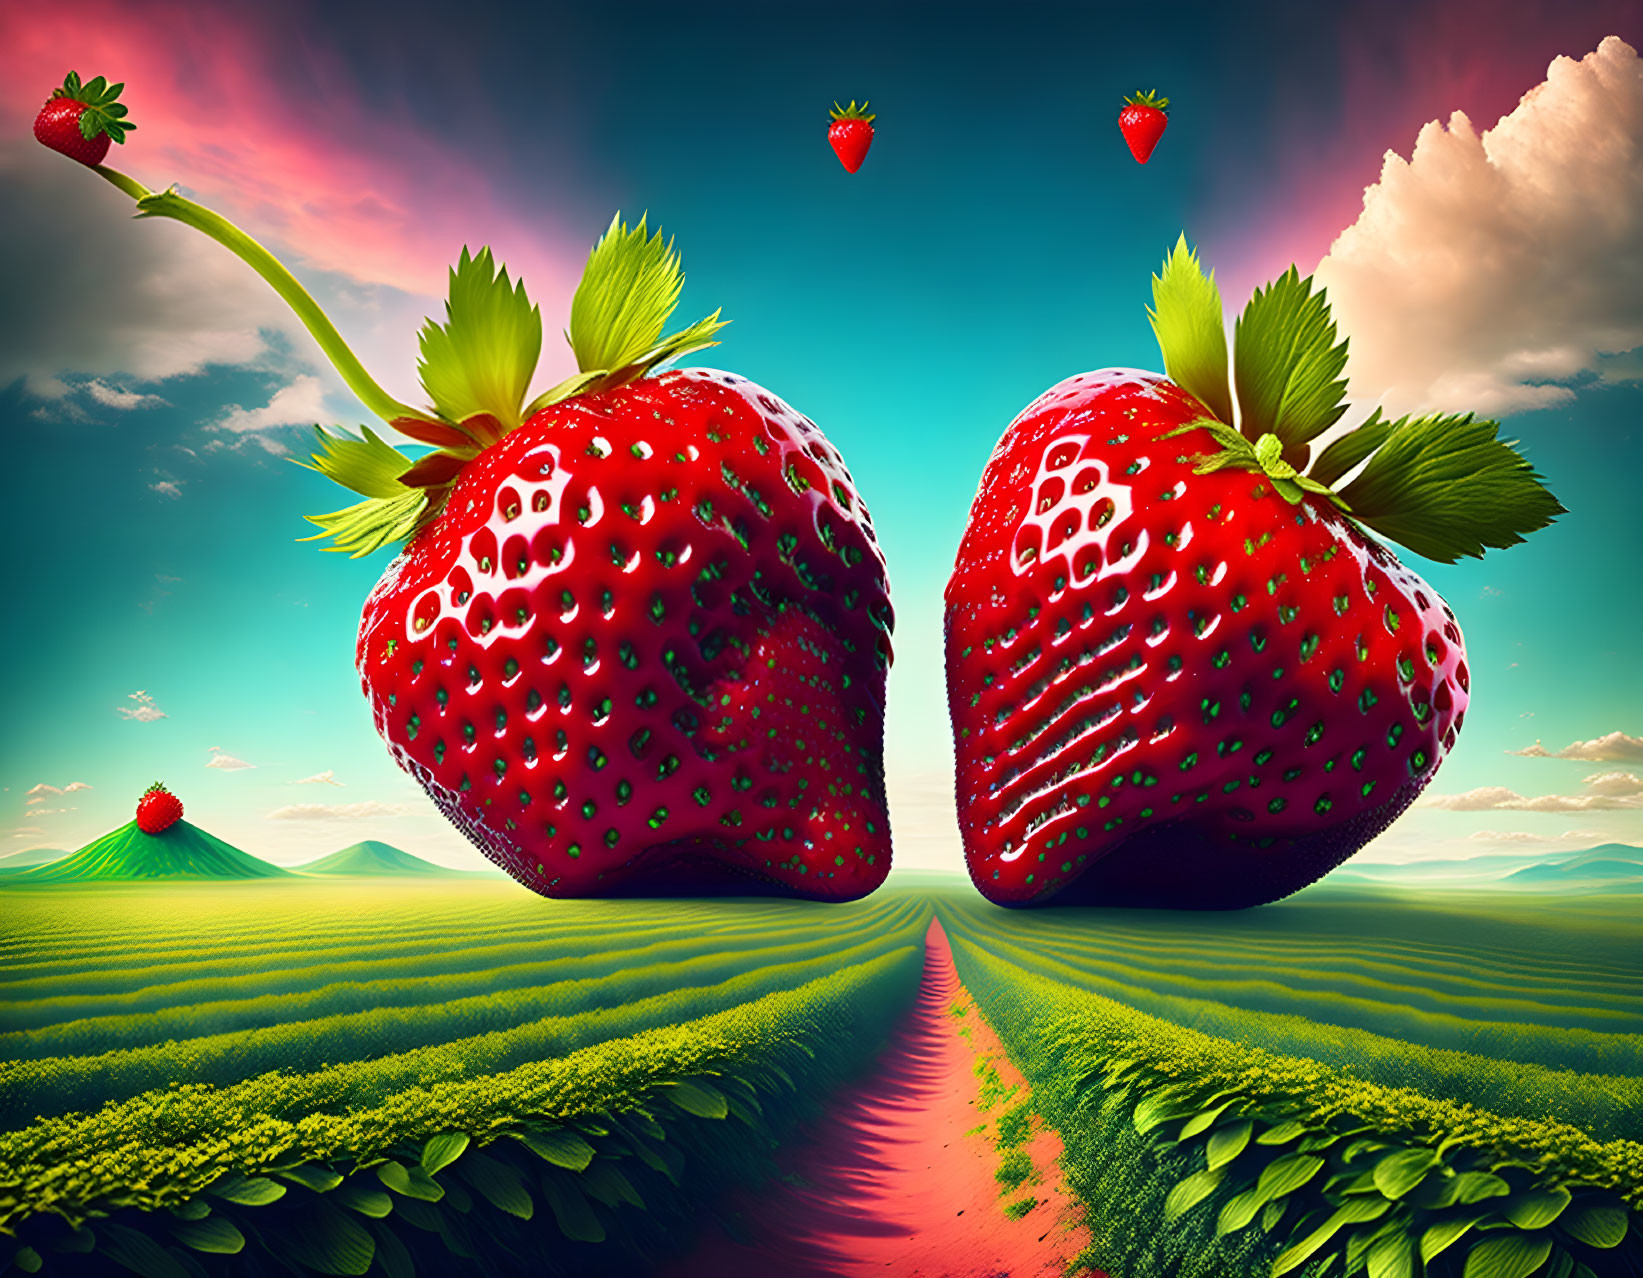 Giant strawberries in surreal landscape with floating fruit